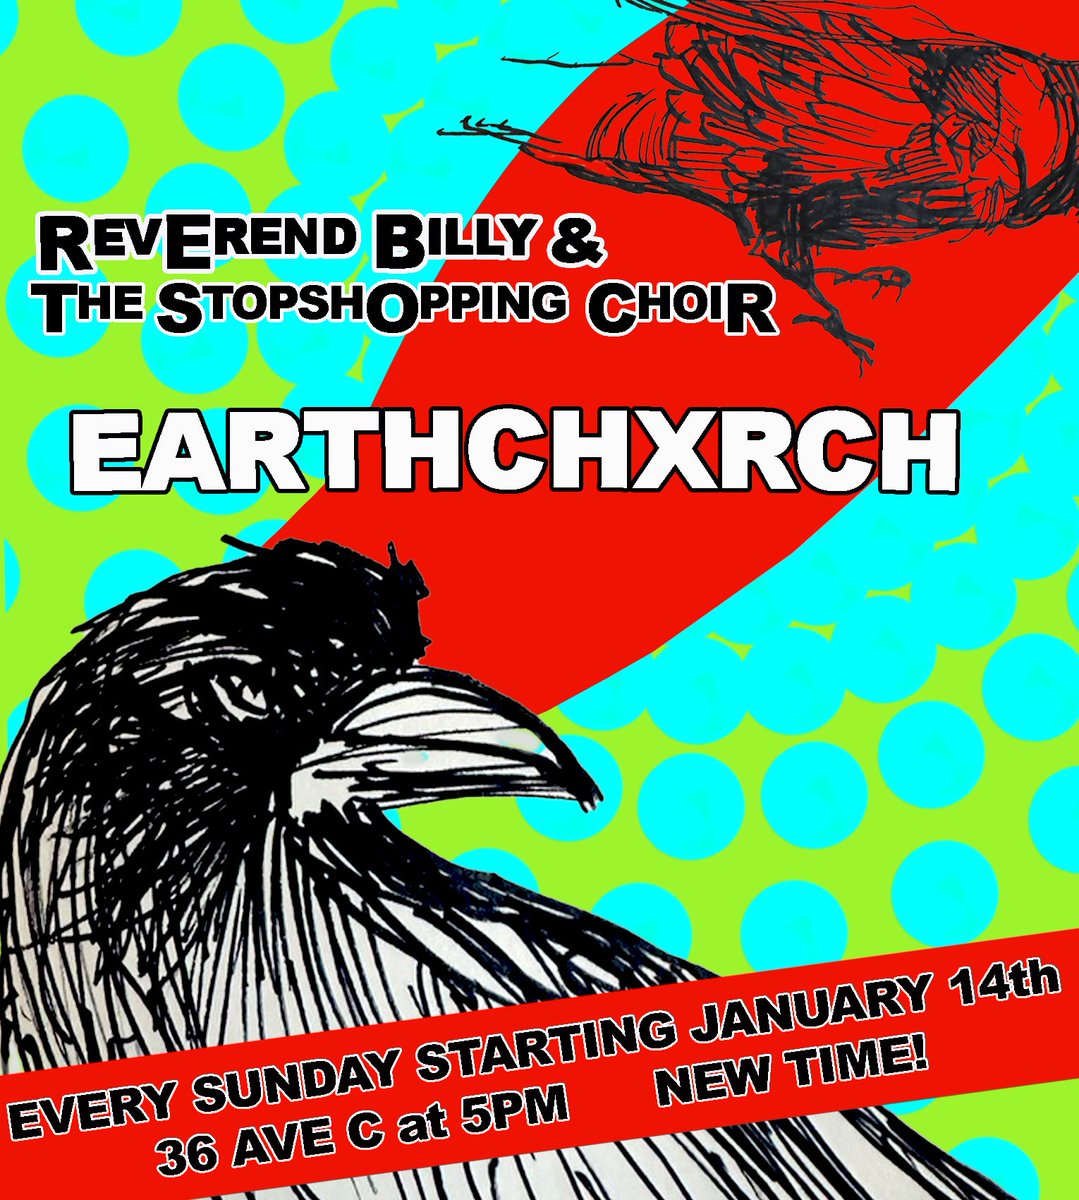 🌎 EARTHALUJAH! Th #ChurchofStopShopping is back in session🙏. Let’s have a mass for the mass extinction - Join Reverend Billy and the #StopShoppingChoir at Earthchxrch next Sunday 1/14 @ 5 PM to sing, to dance, and to bring community and change into our little piece of the…